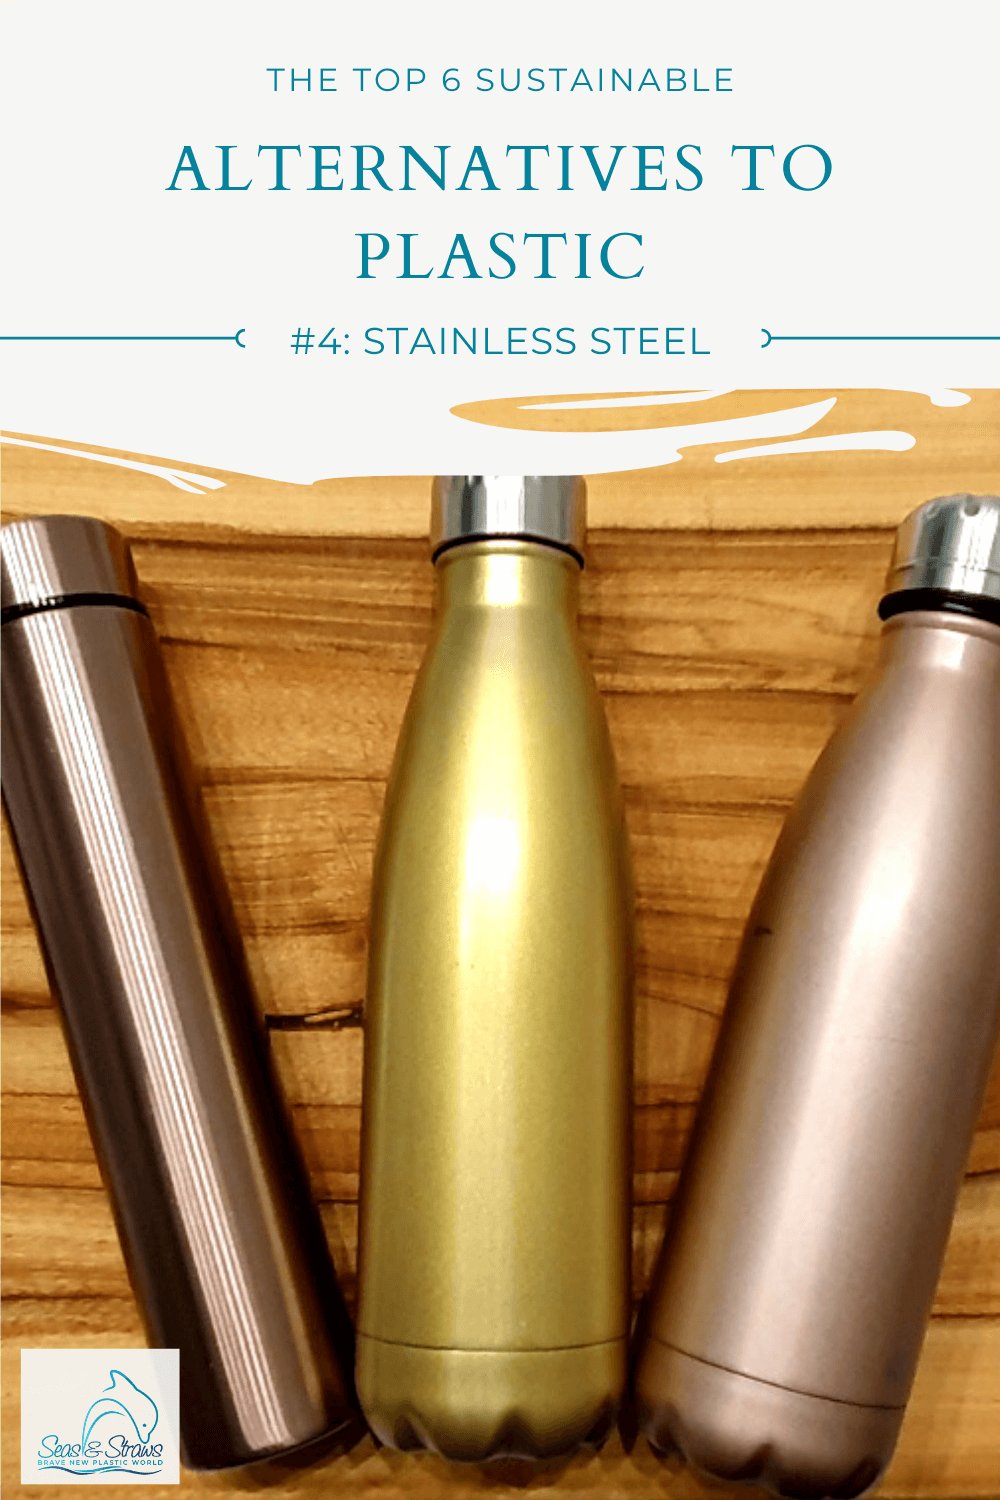 The Top 6 Sustainable Alternatives to Single-Use Plastic - Stainless Steel